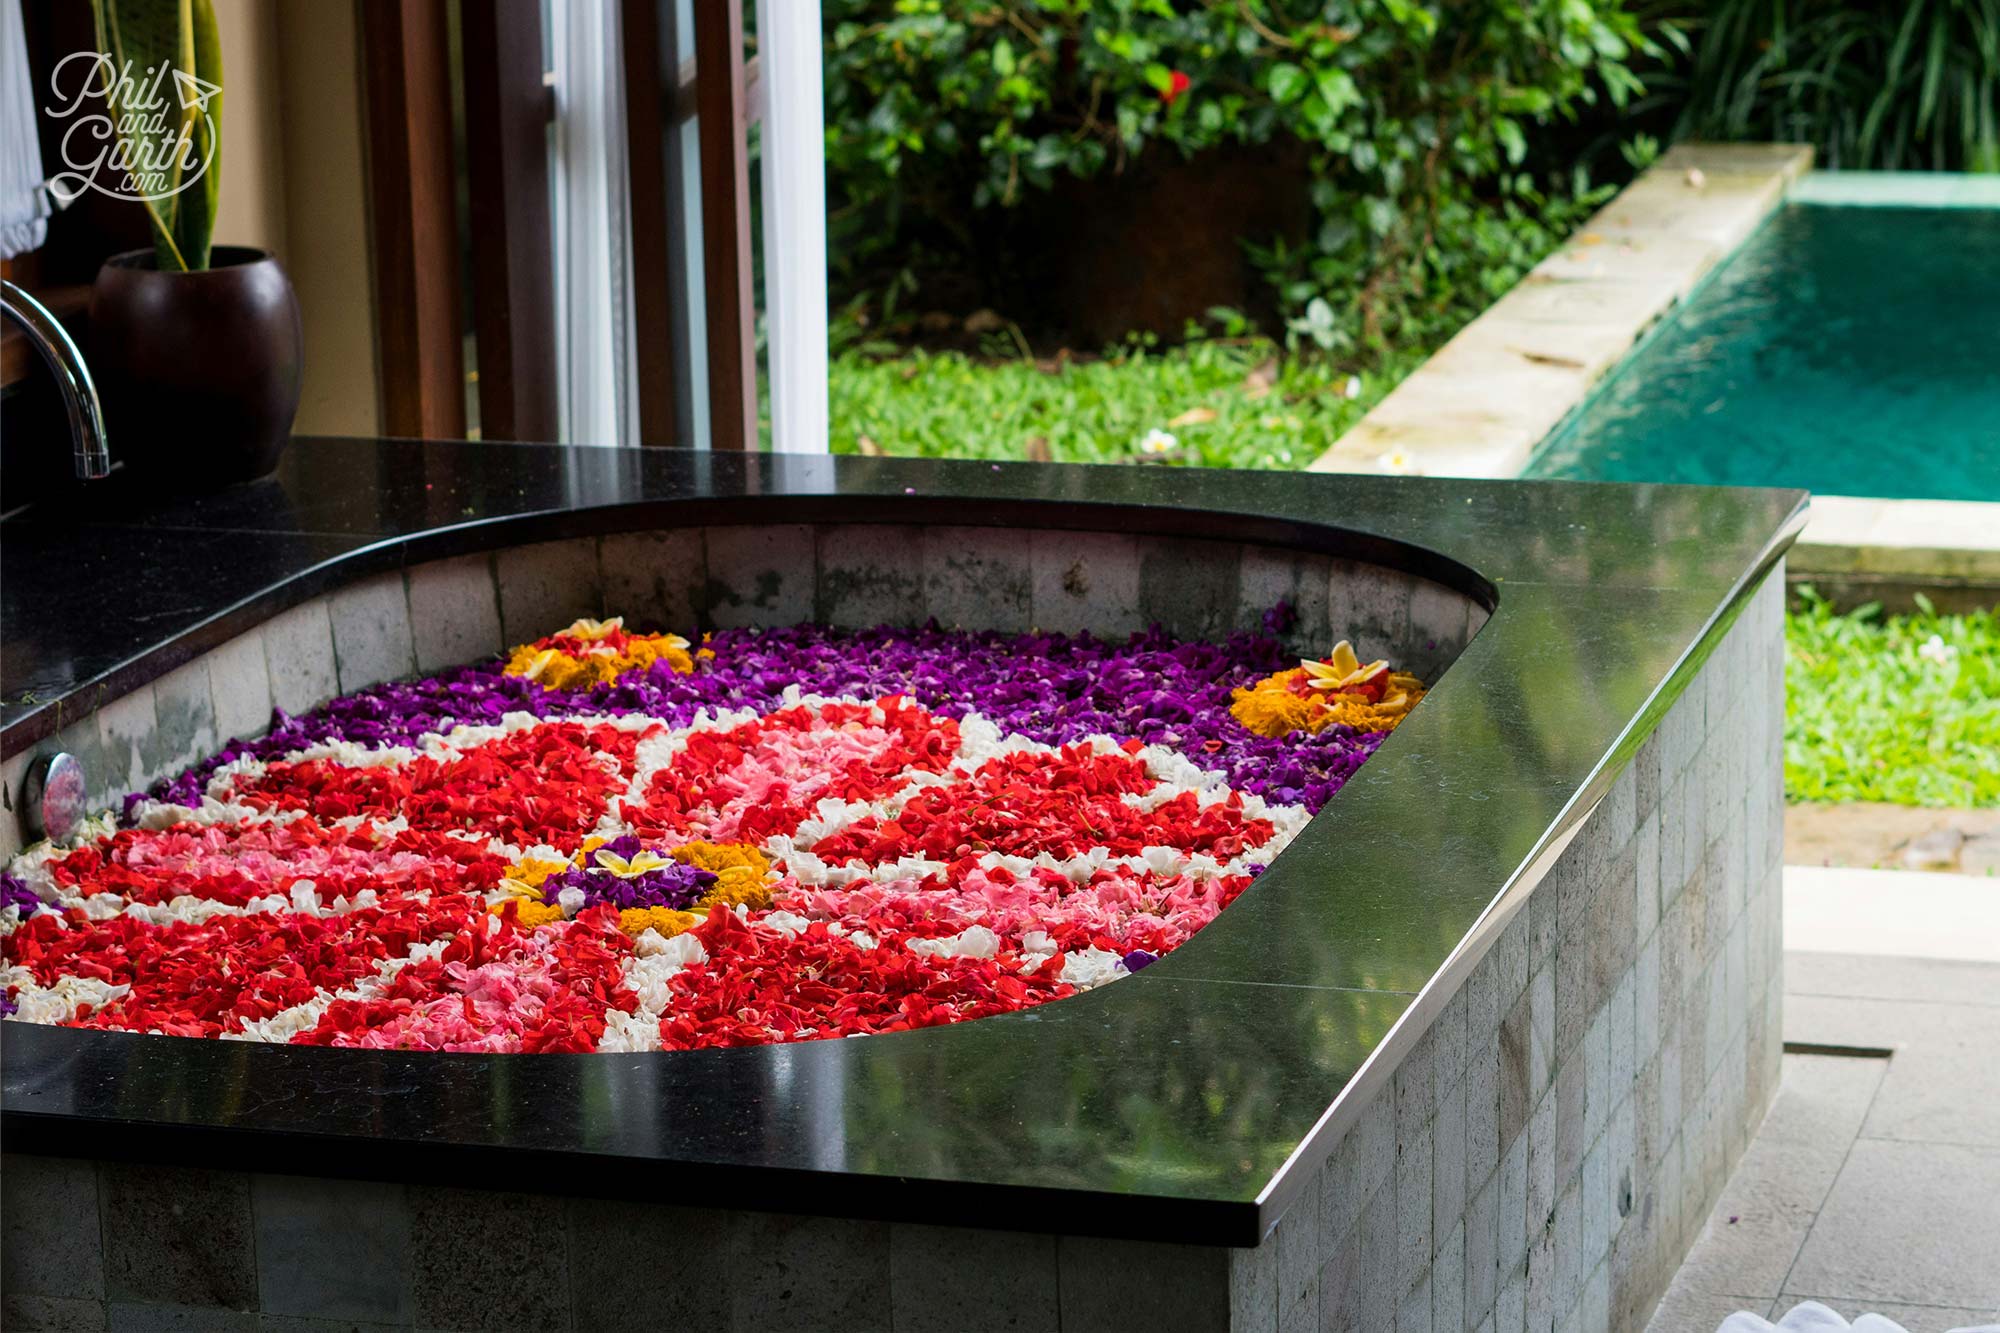 A Bali flower bath - imagine relaxing with the scent from the flower petals